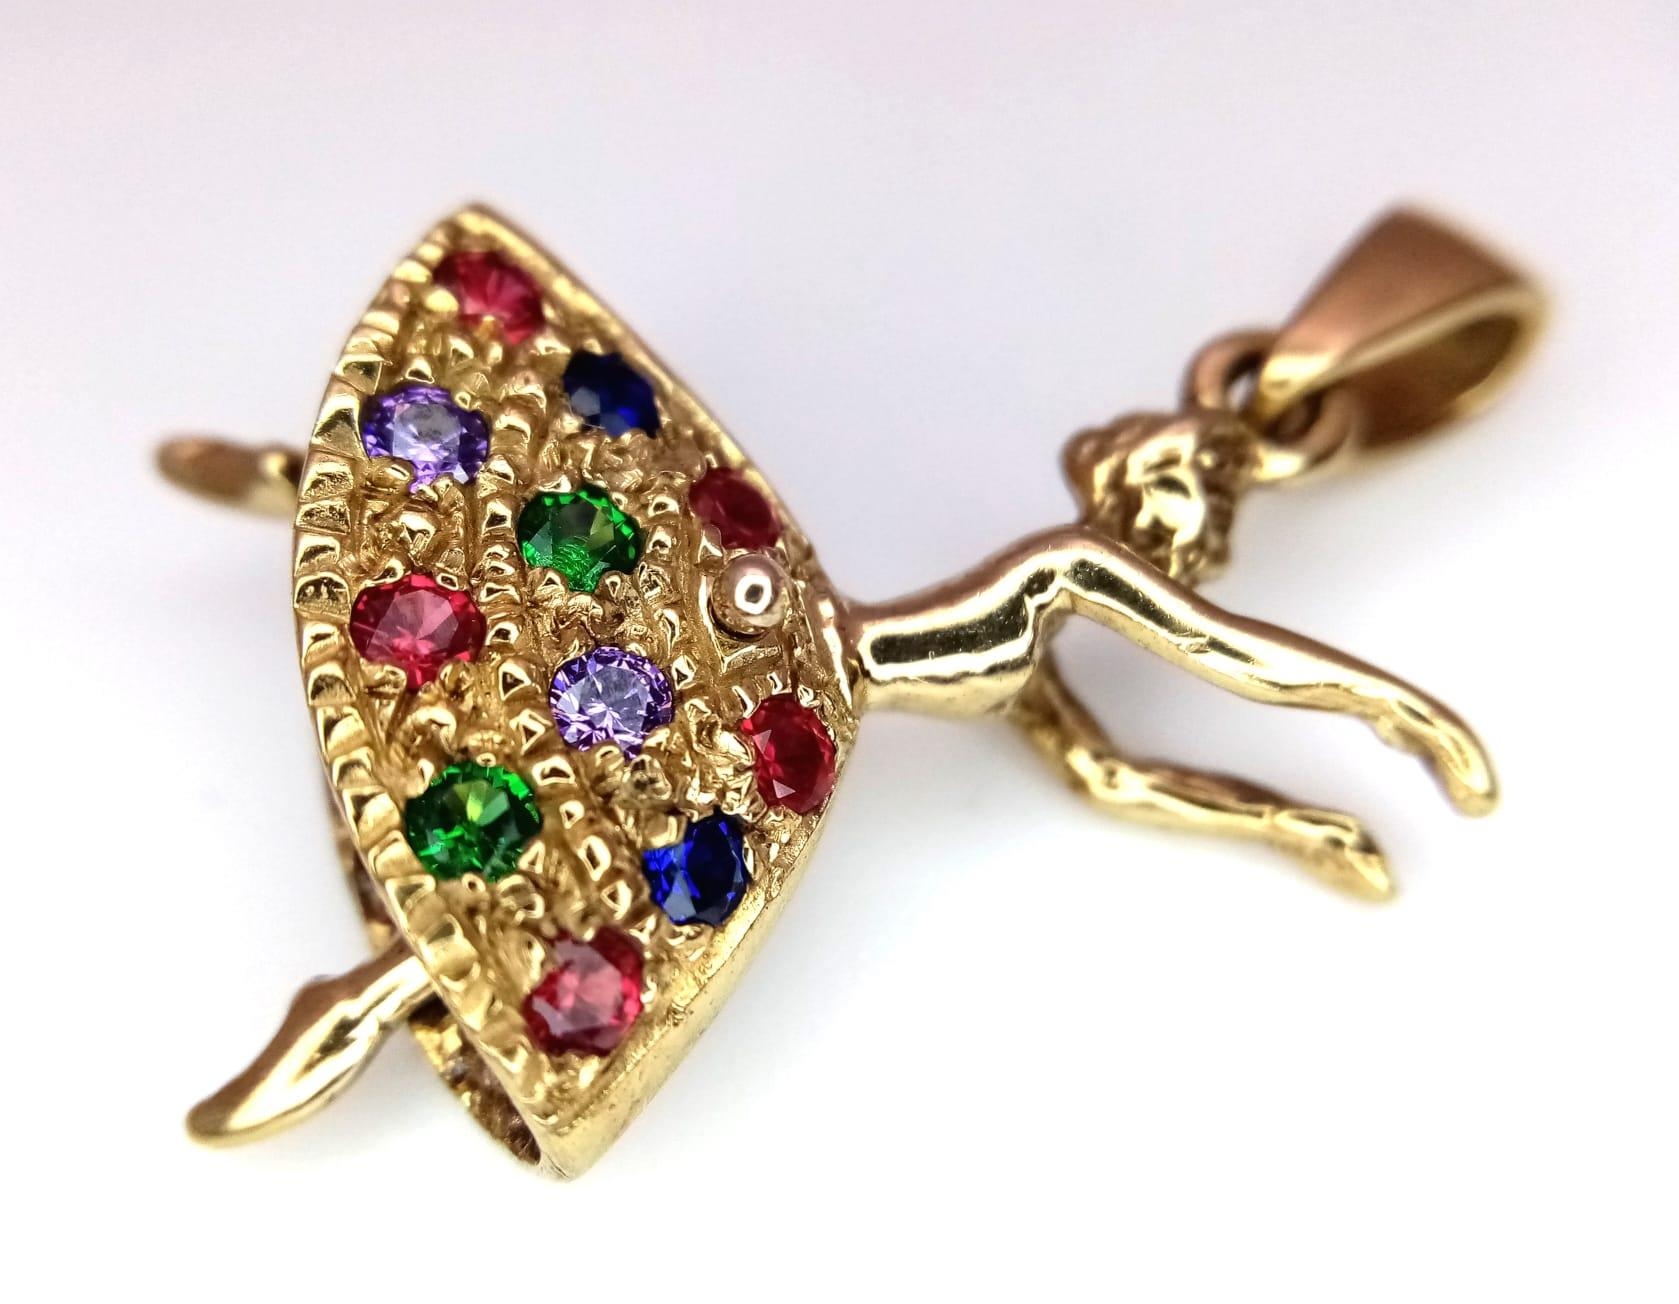 A 9kt Yellow Gold Jewelled Dancing Ballerina Charm/Pendant. Measures 3cm in length. Weight: 5.06g - Image 2 of 6